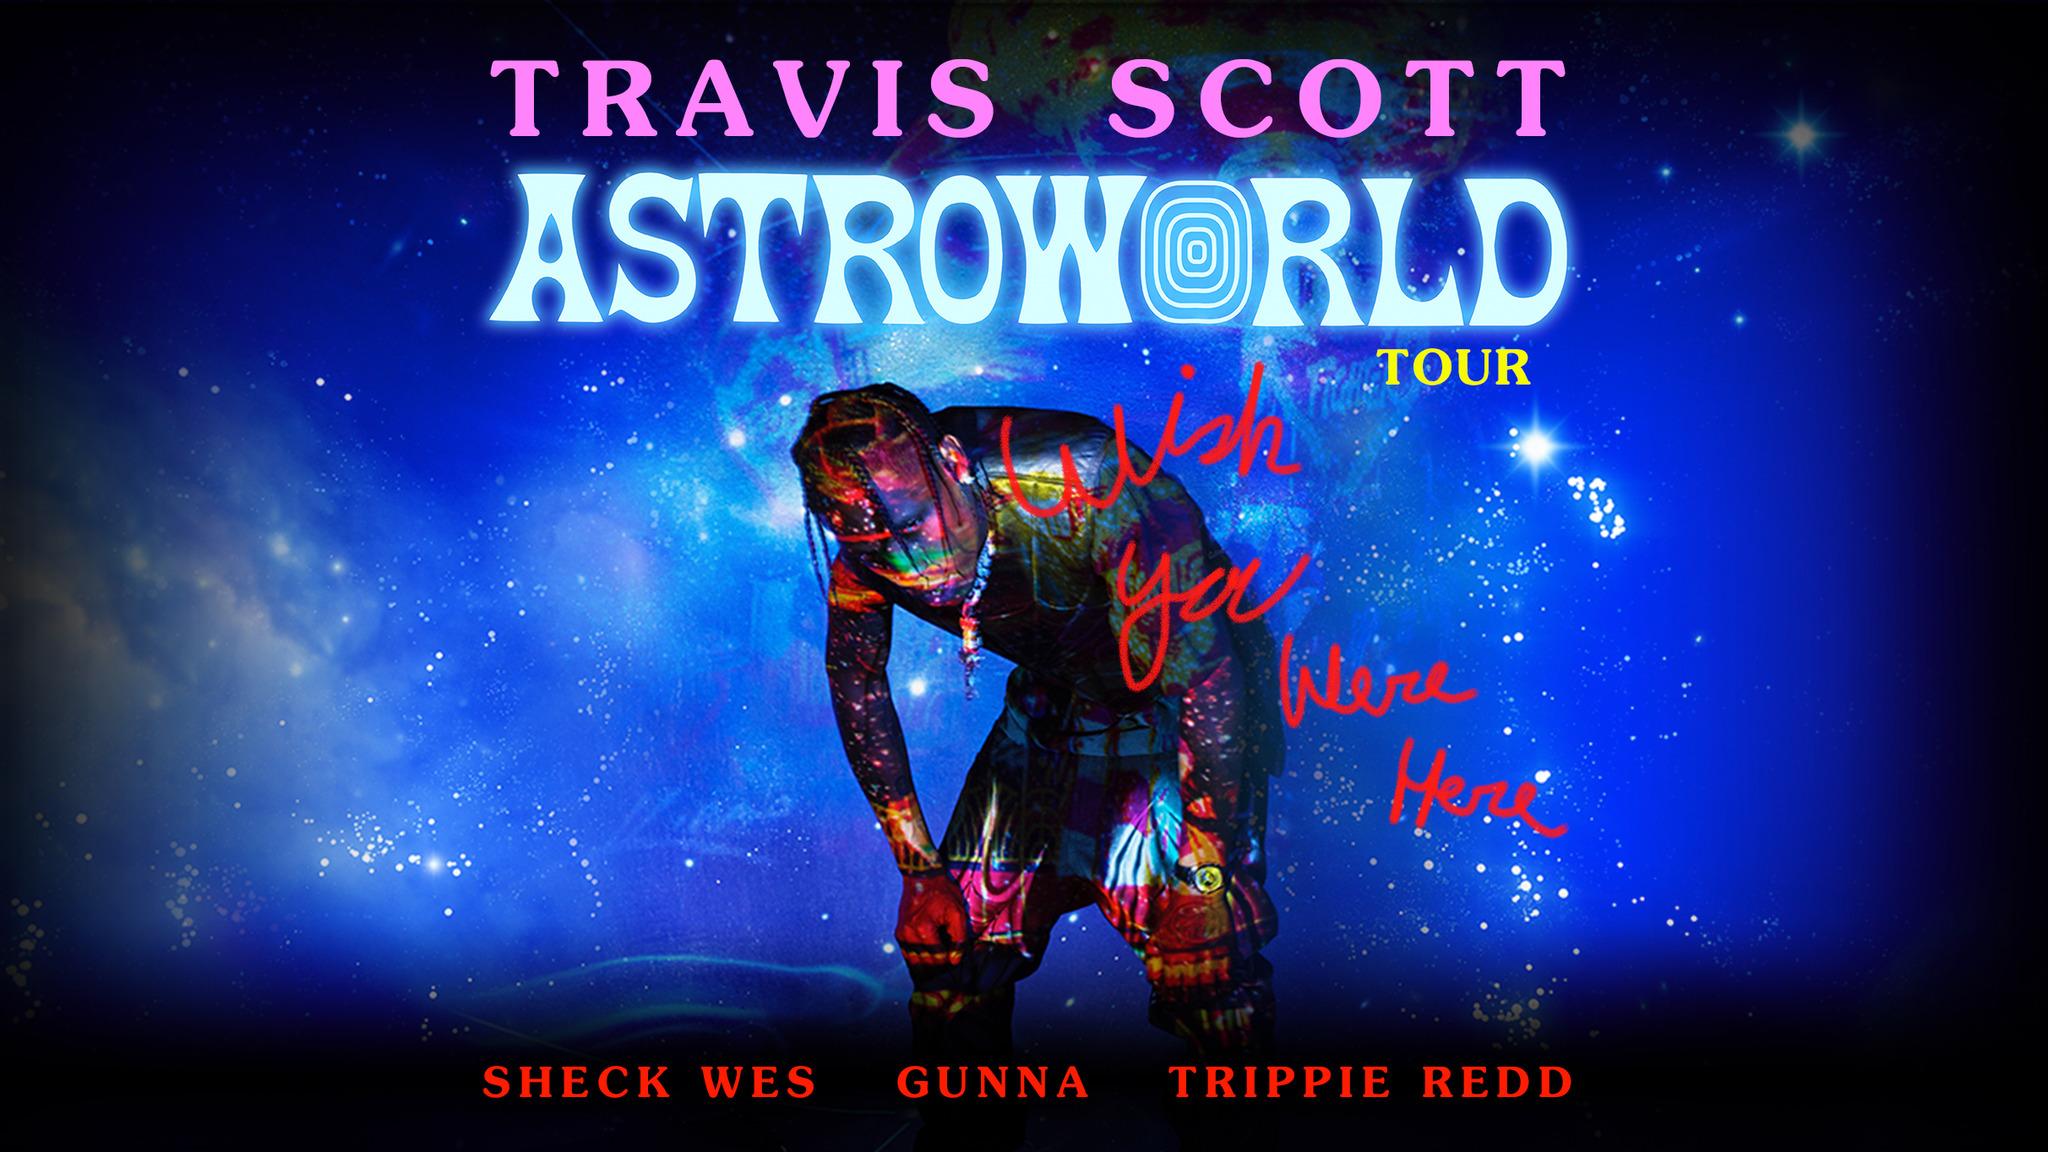 Astroworld Mac Wallpapers